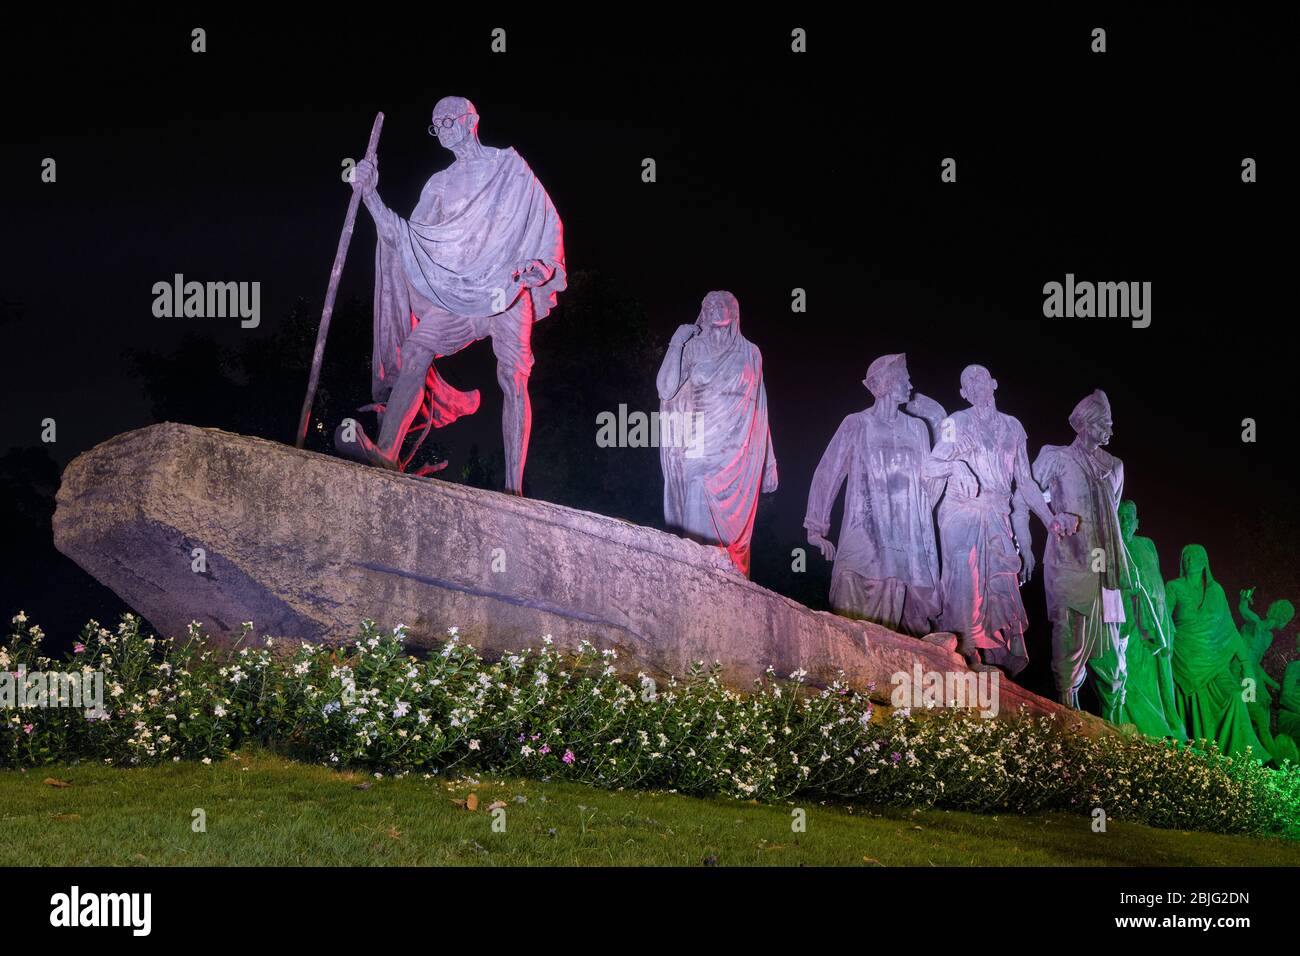 New Delhi / India - September 16, 2019: Dandi March Statue illuminated at night, commemorating the Salt March of 1930, with Gandhi and his followers i Stock Photo